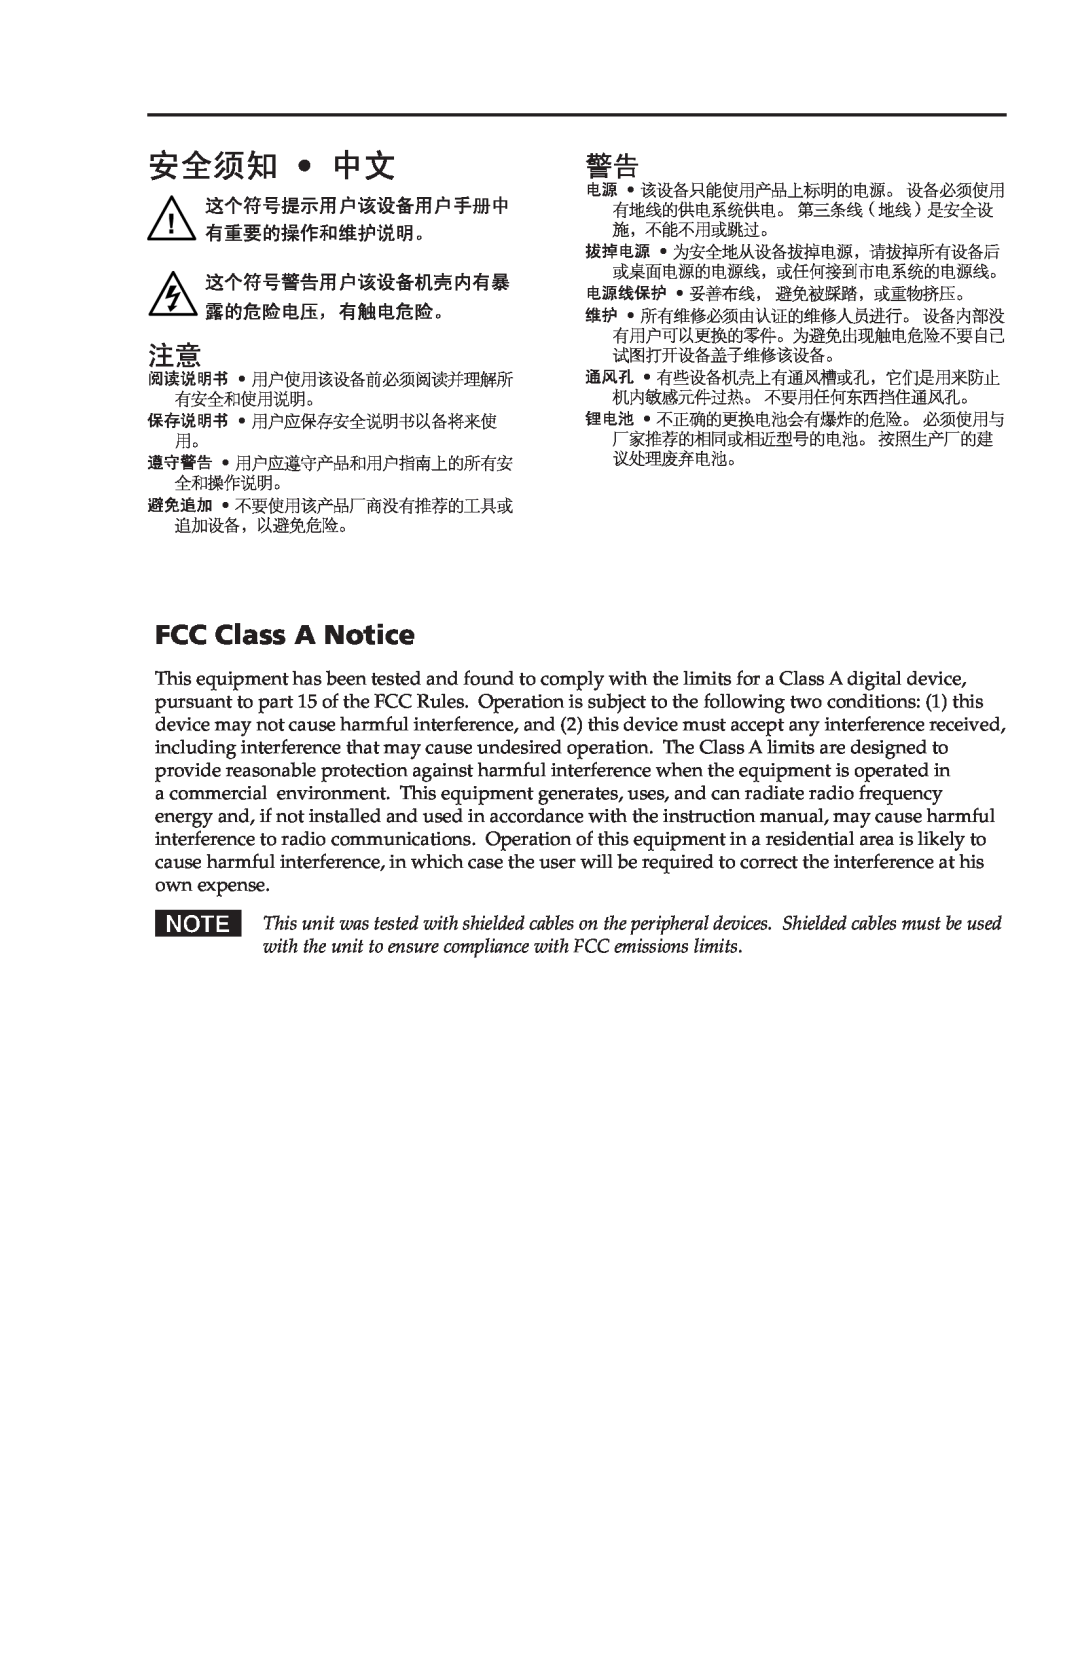 Extron electronic user manual FCC Class A Notice, VSW 2VGA A Table of Contents 